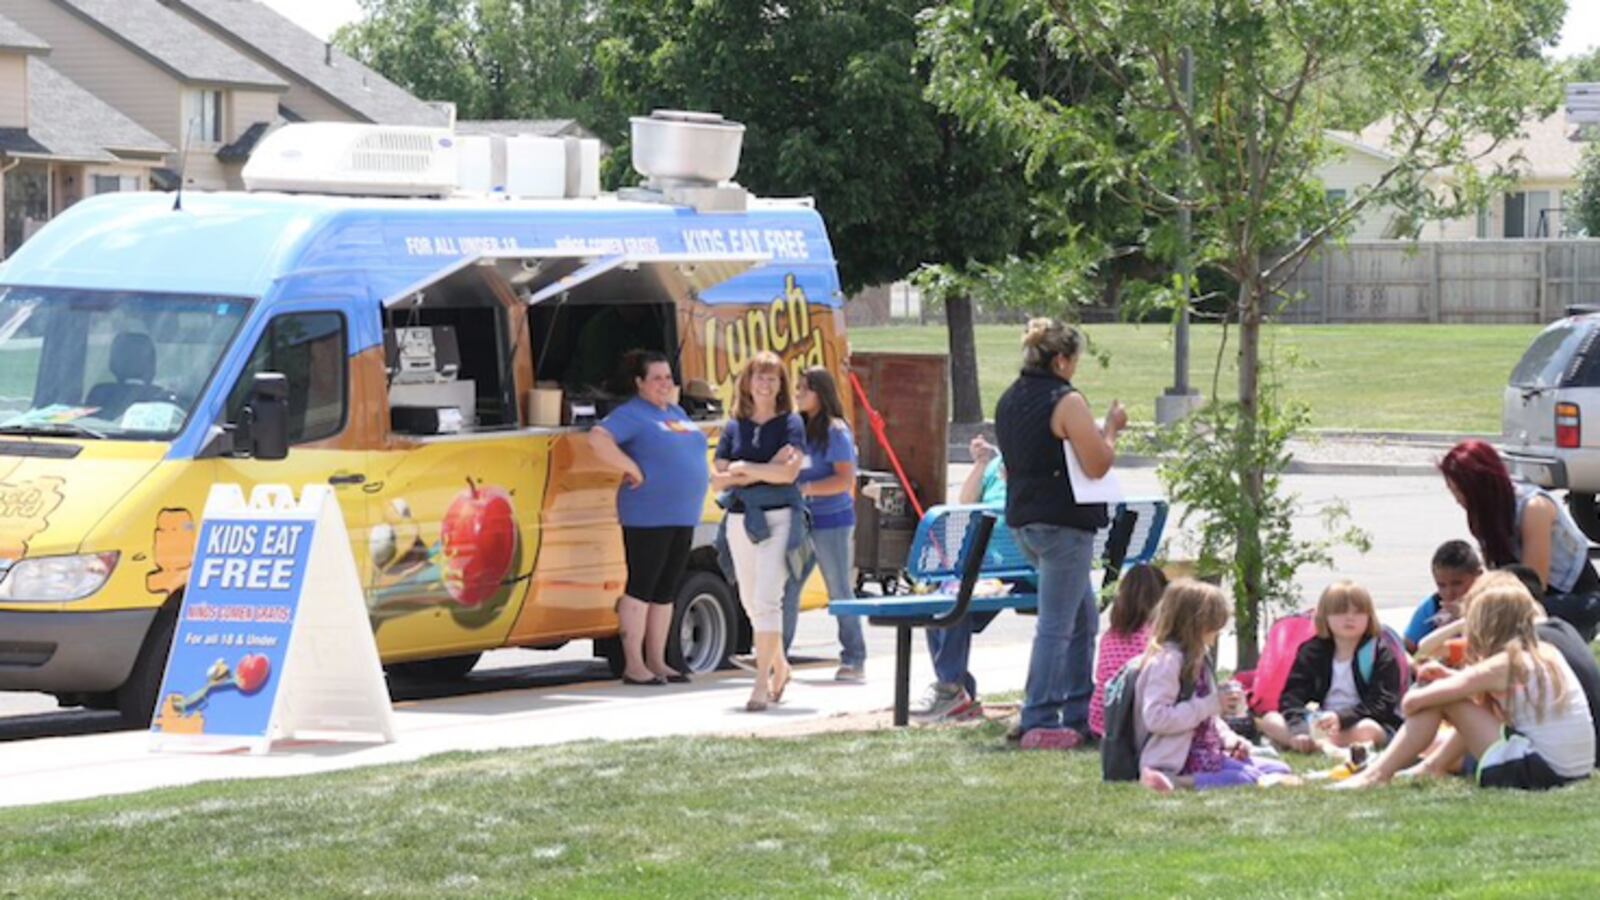 The Mesa County Valley district launched a mobile meals program this summer with $58,000 from the Western Colorado Community Foundation. The “Lunch Lizard” van came about after three of five district schools stopped offering summer meals because they could no longer pay for accompanying activities.